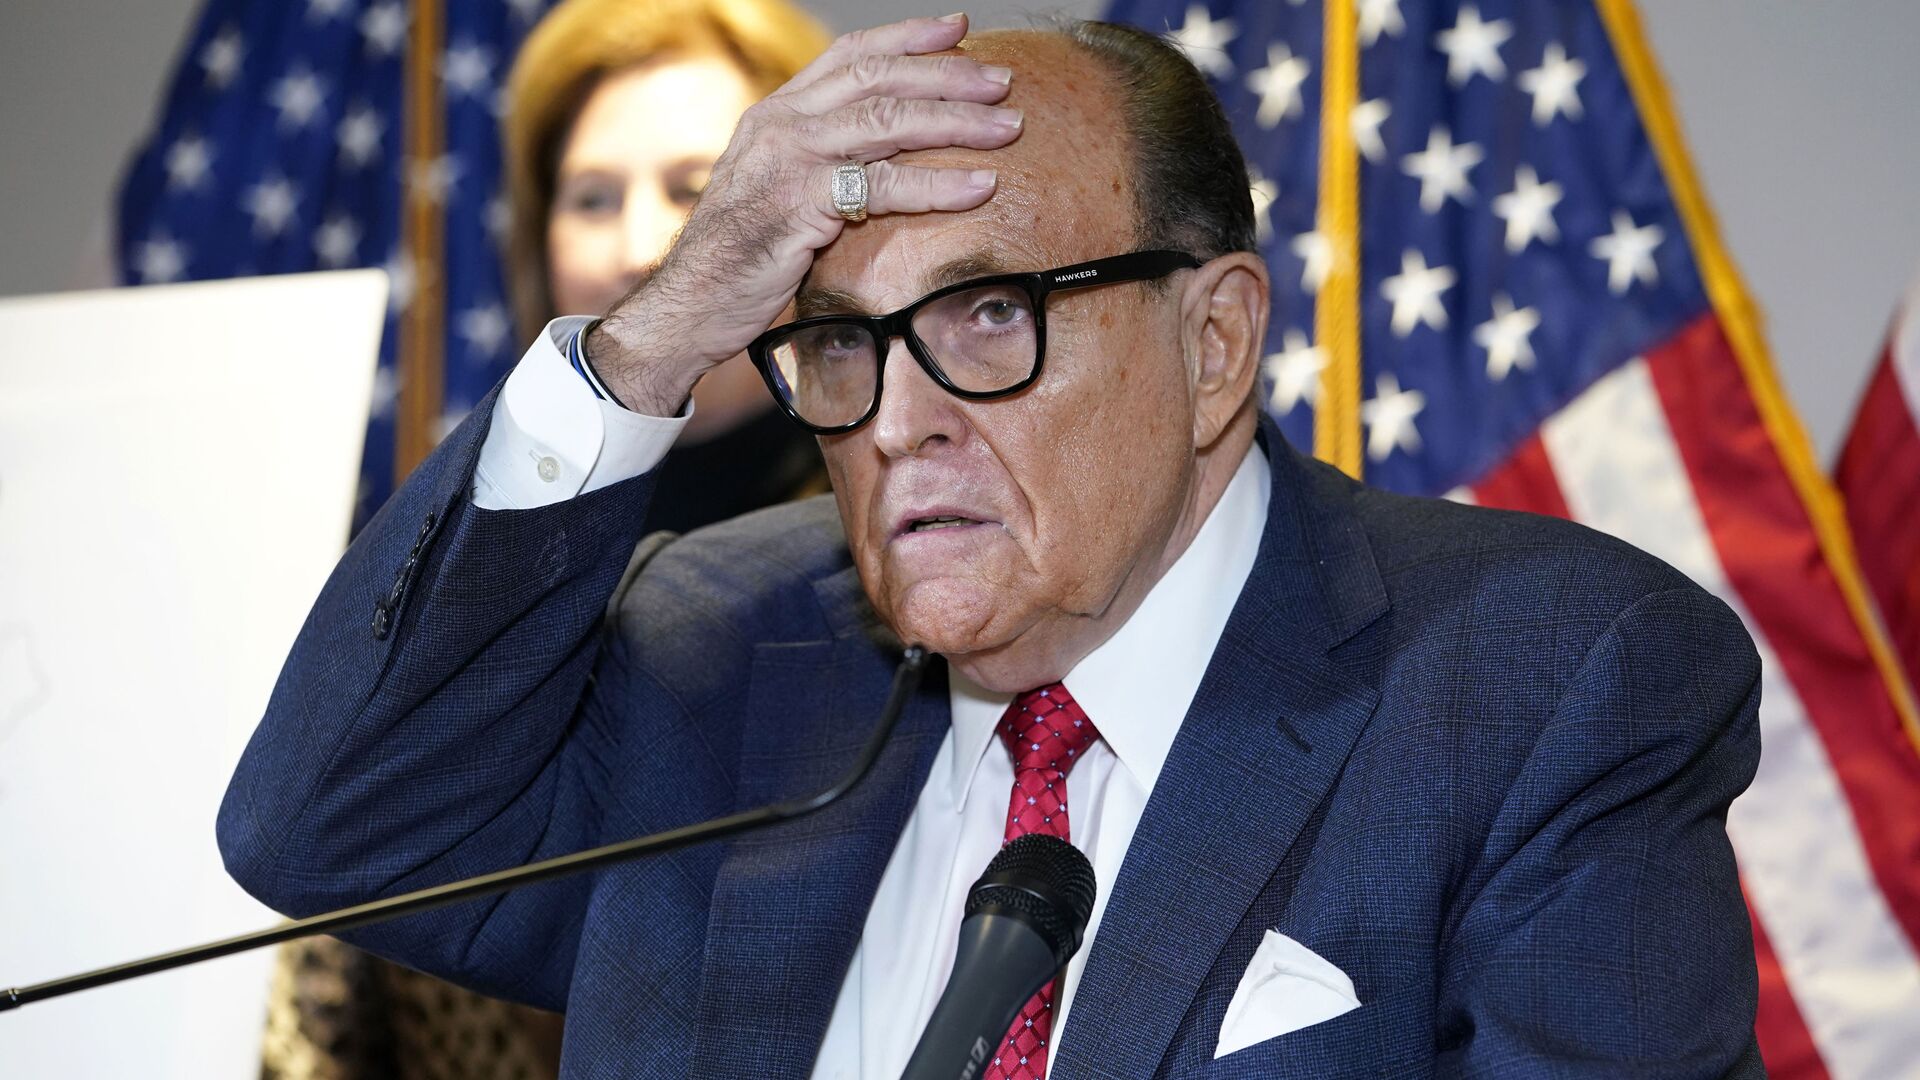 In this Nov. 19, 2020, file photo, former New York Mayor Rudy Giuliani, who was a lawyer for President Donald Trump, speaks during a news conference at the Republican National Committee headquarters in Washington - Sputnik International, 1920, 09.02.2022